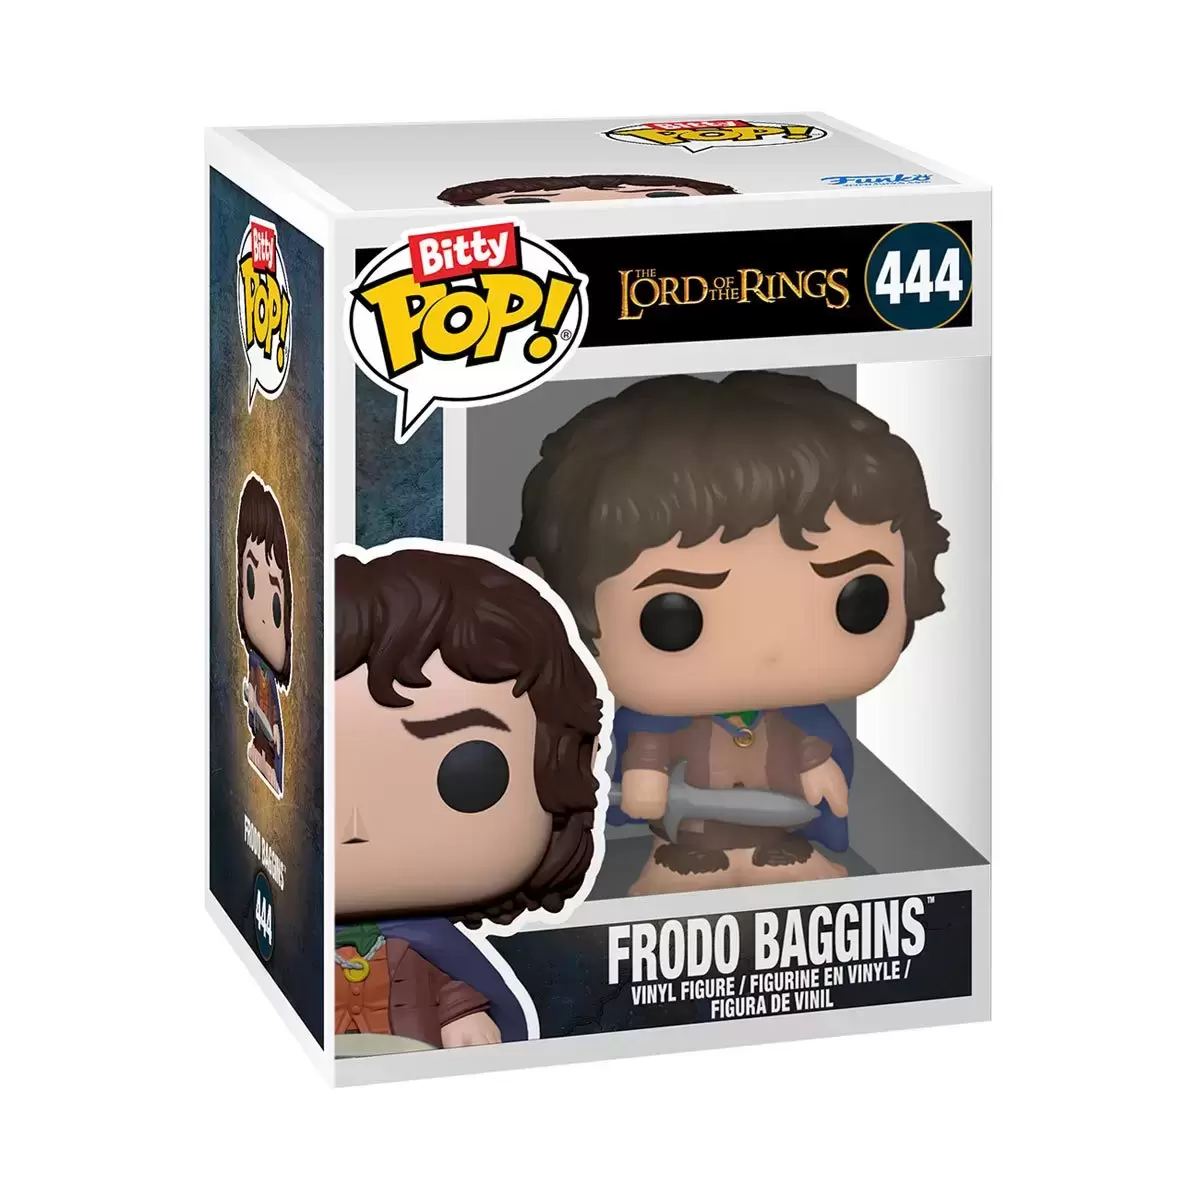 Bitty POP! - Lord of The Rings - Frodo Baggins